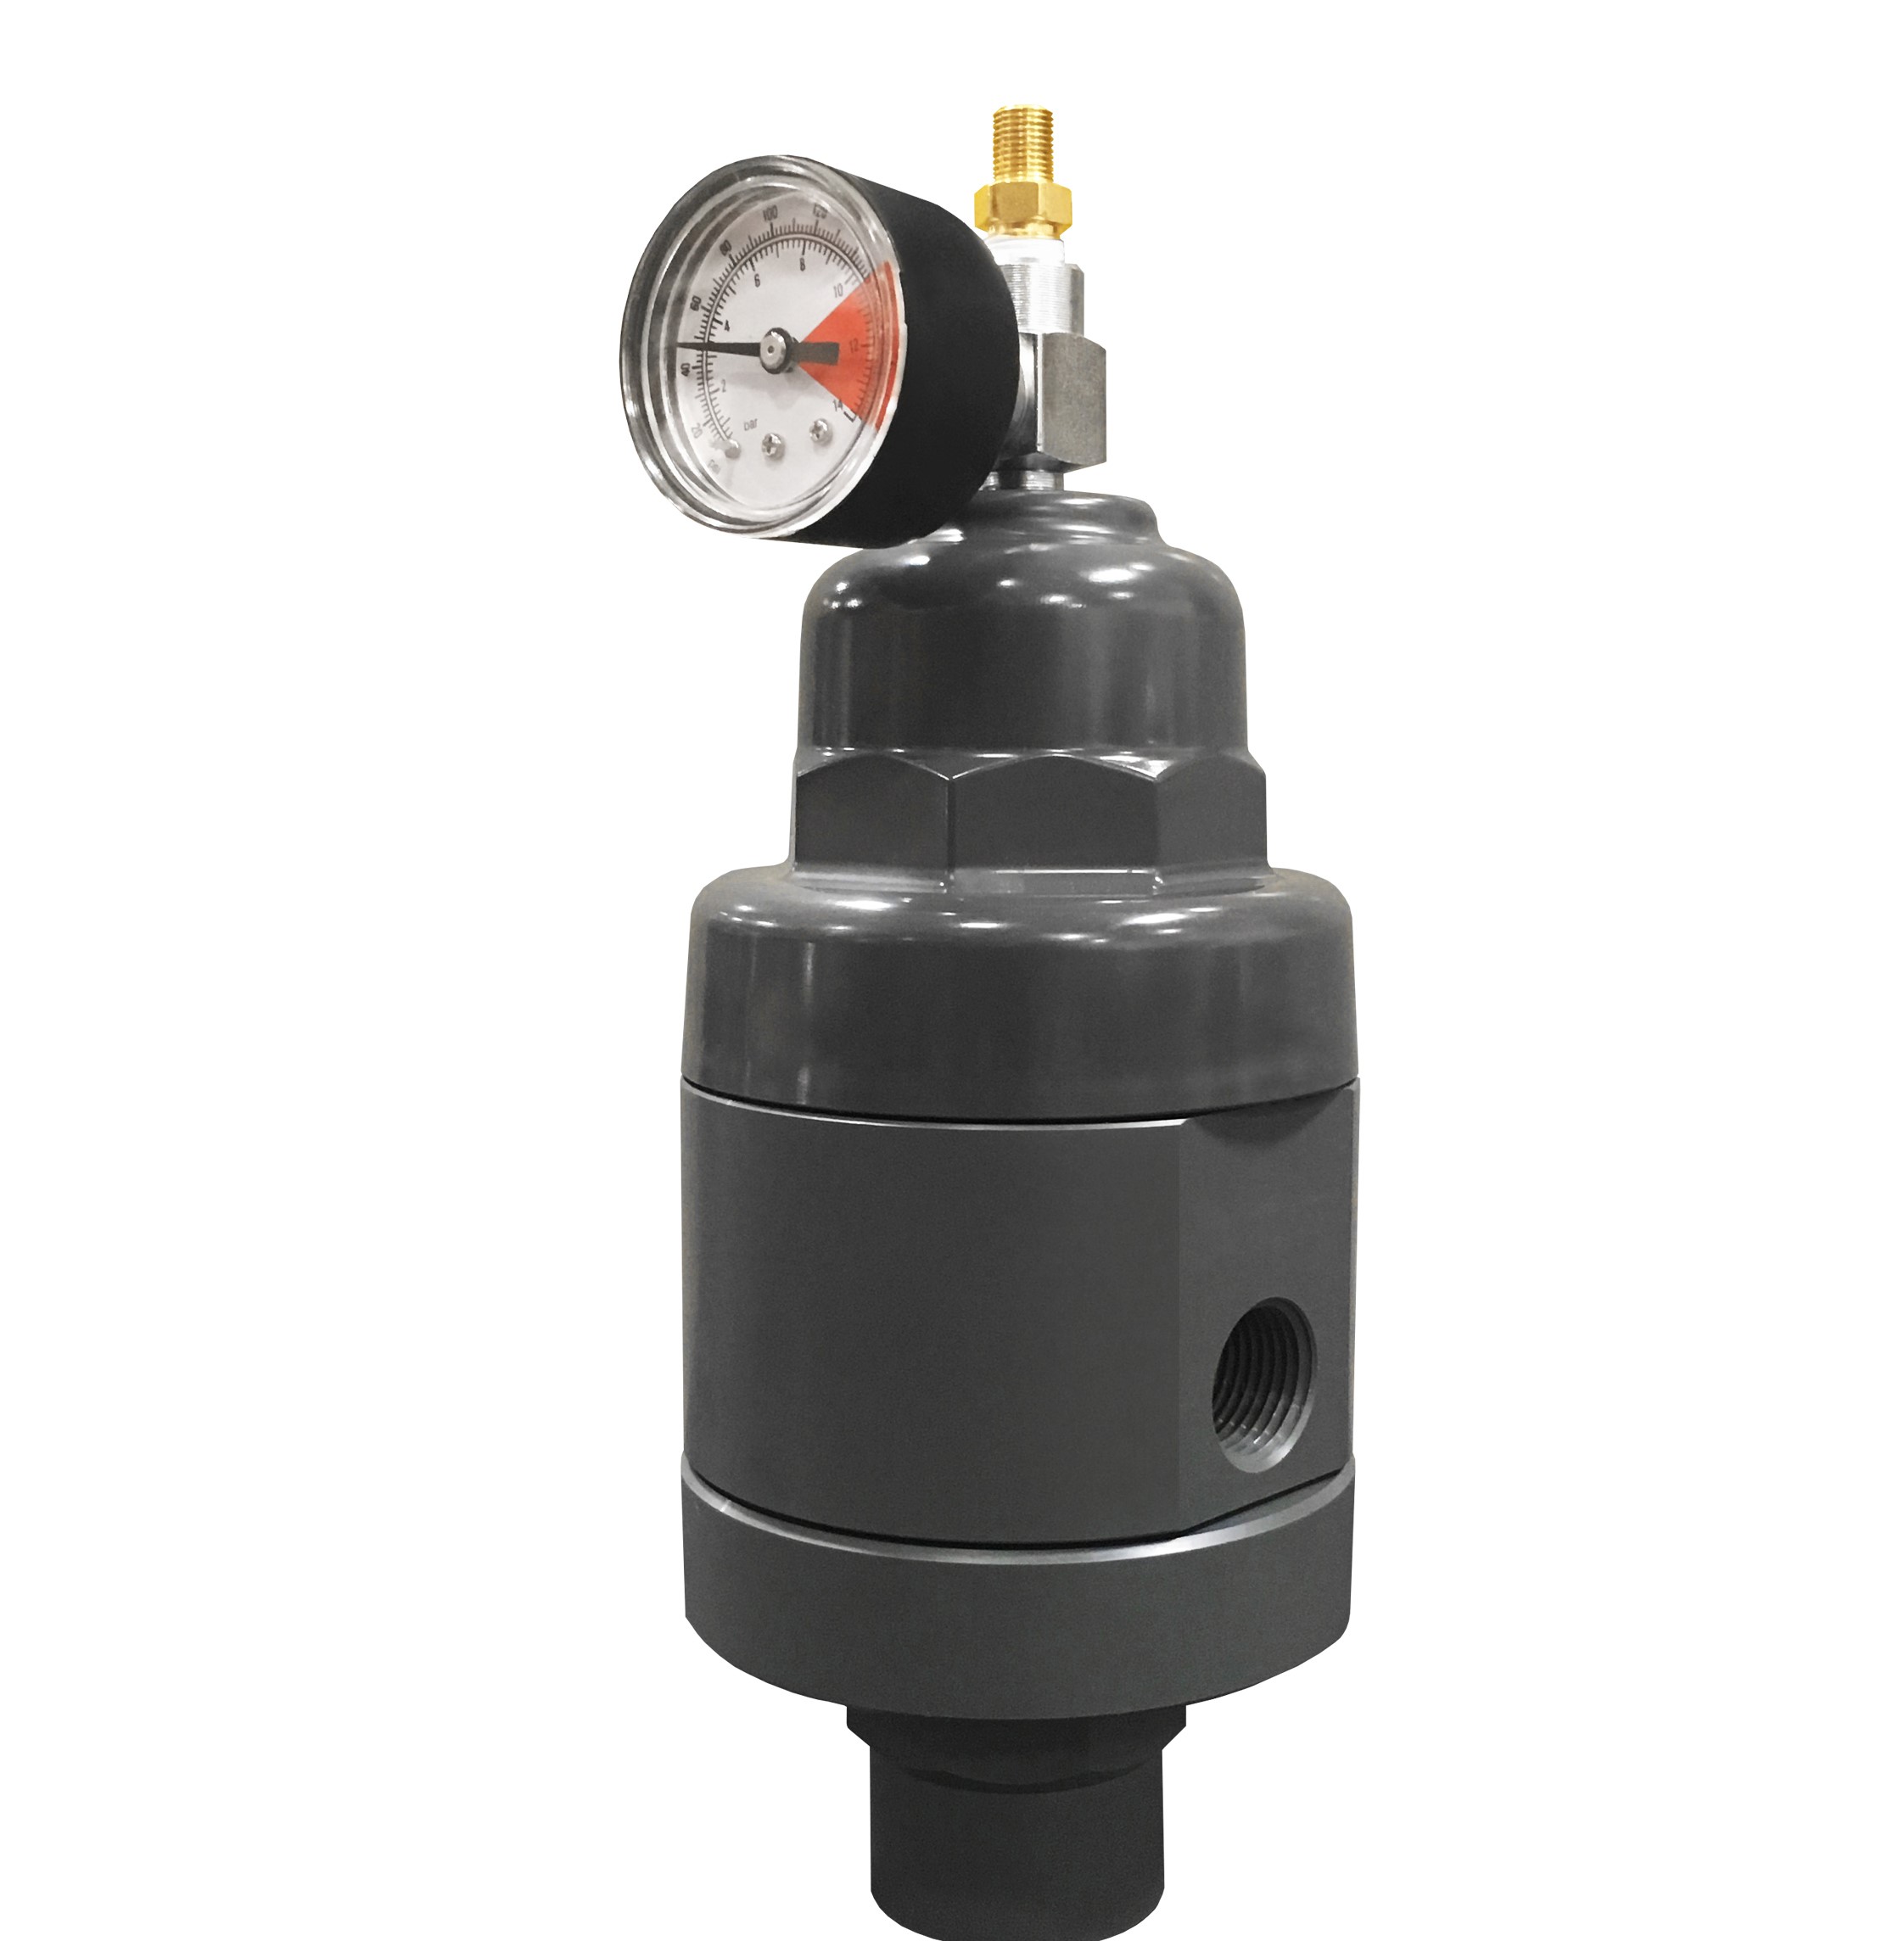 Location and proximity are key when installing pulsation dampeners and back pressure valves in any pumping system.